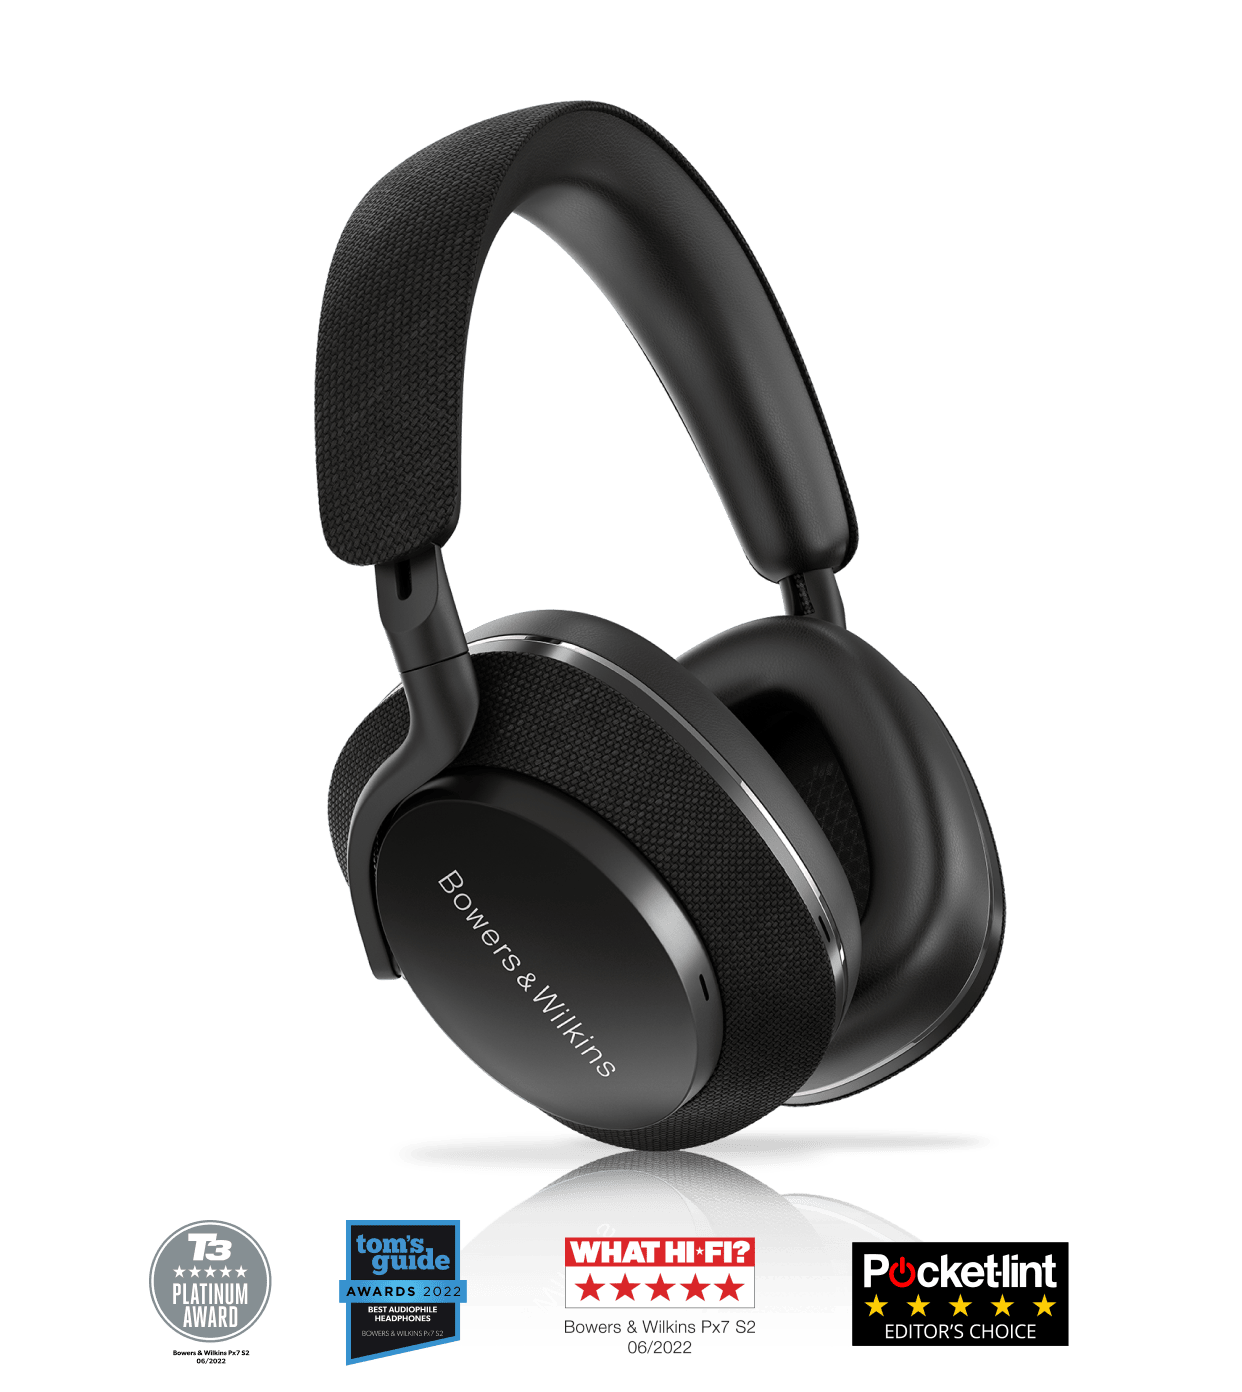 Bowers & Wilkins Px7 S2 Over-ear noise canceling headphones